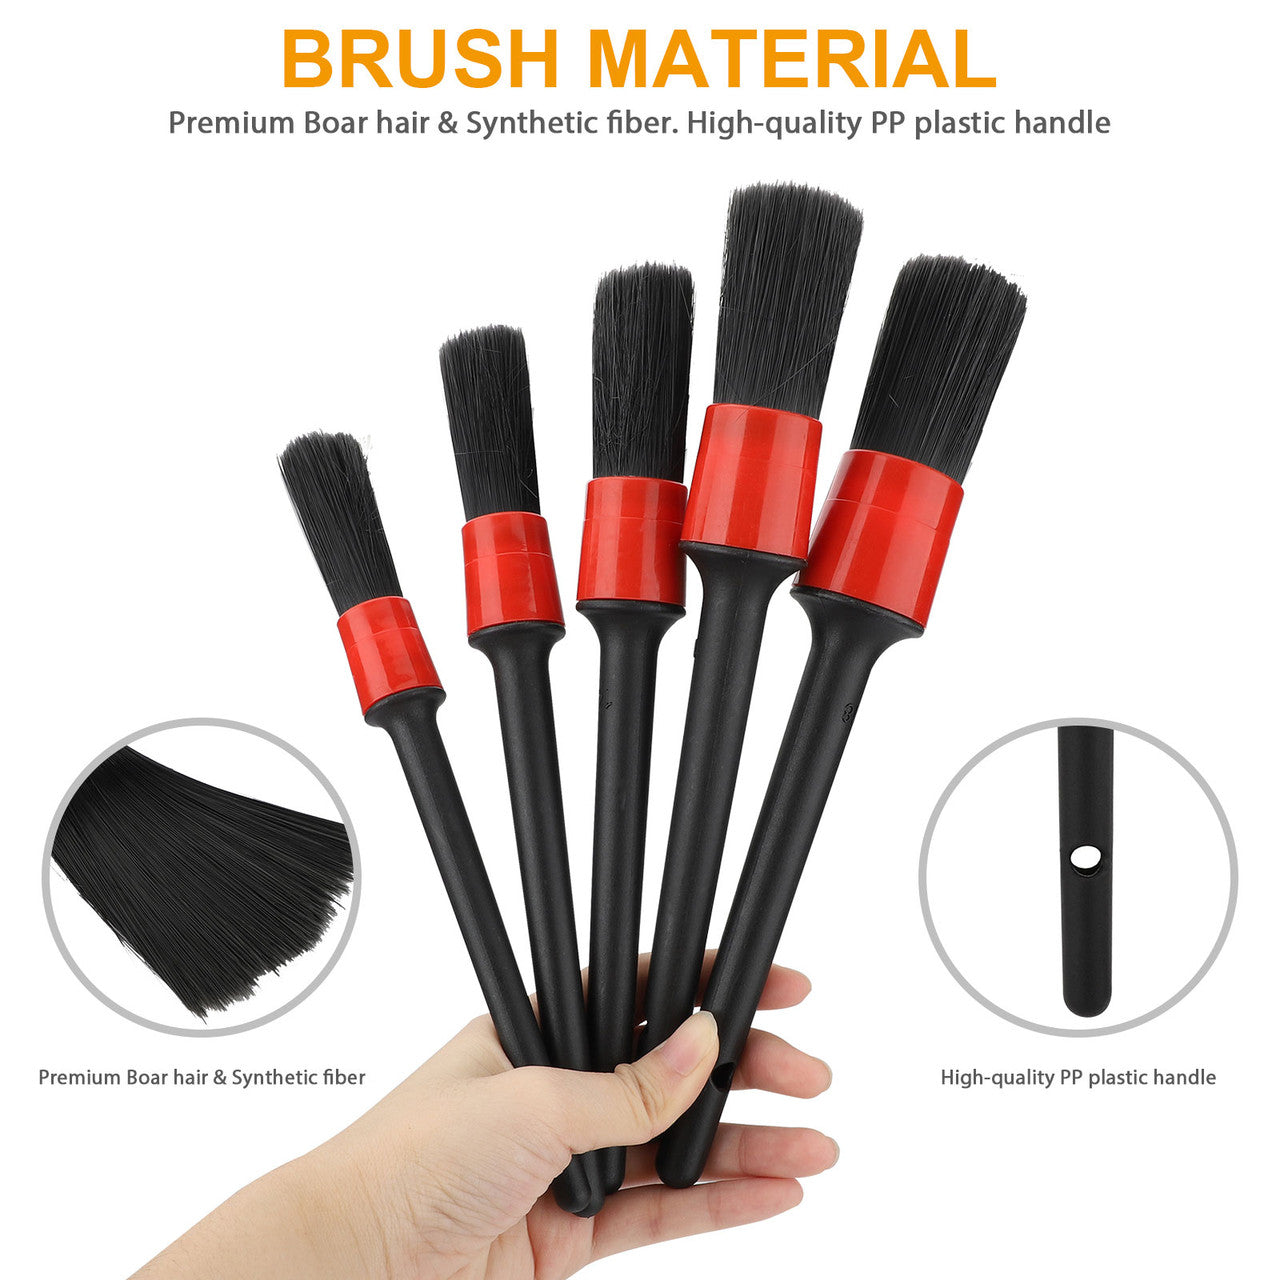 9Pcs Car Detailing Brush Auto Detail Brush Set, 5-Size Boar Hair Automotive Detail Brushes Kit w/ Air Vent Brush, 3 Wire Brushes for Car Interior Exterior, Wheels Leather Engine Dashboard Cleaning